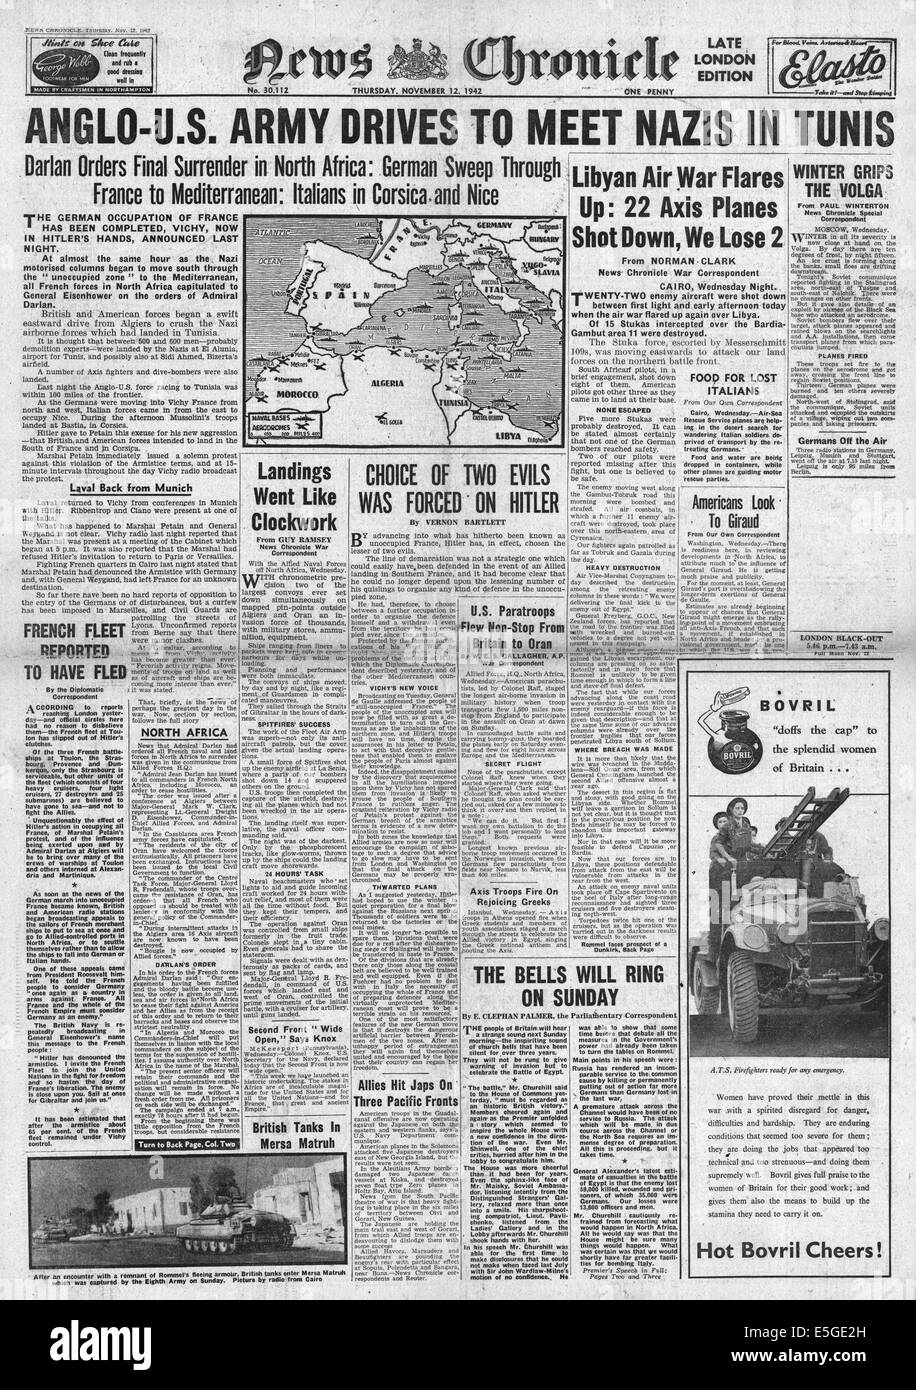 1942 News Chronicle front page reporting British 8th Army and U.S. Army ...